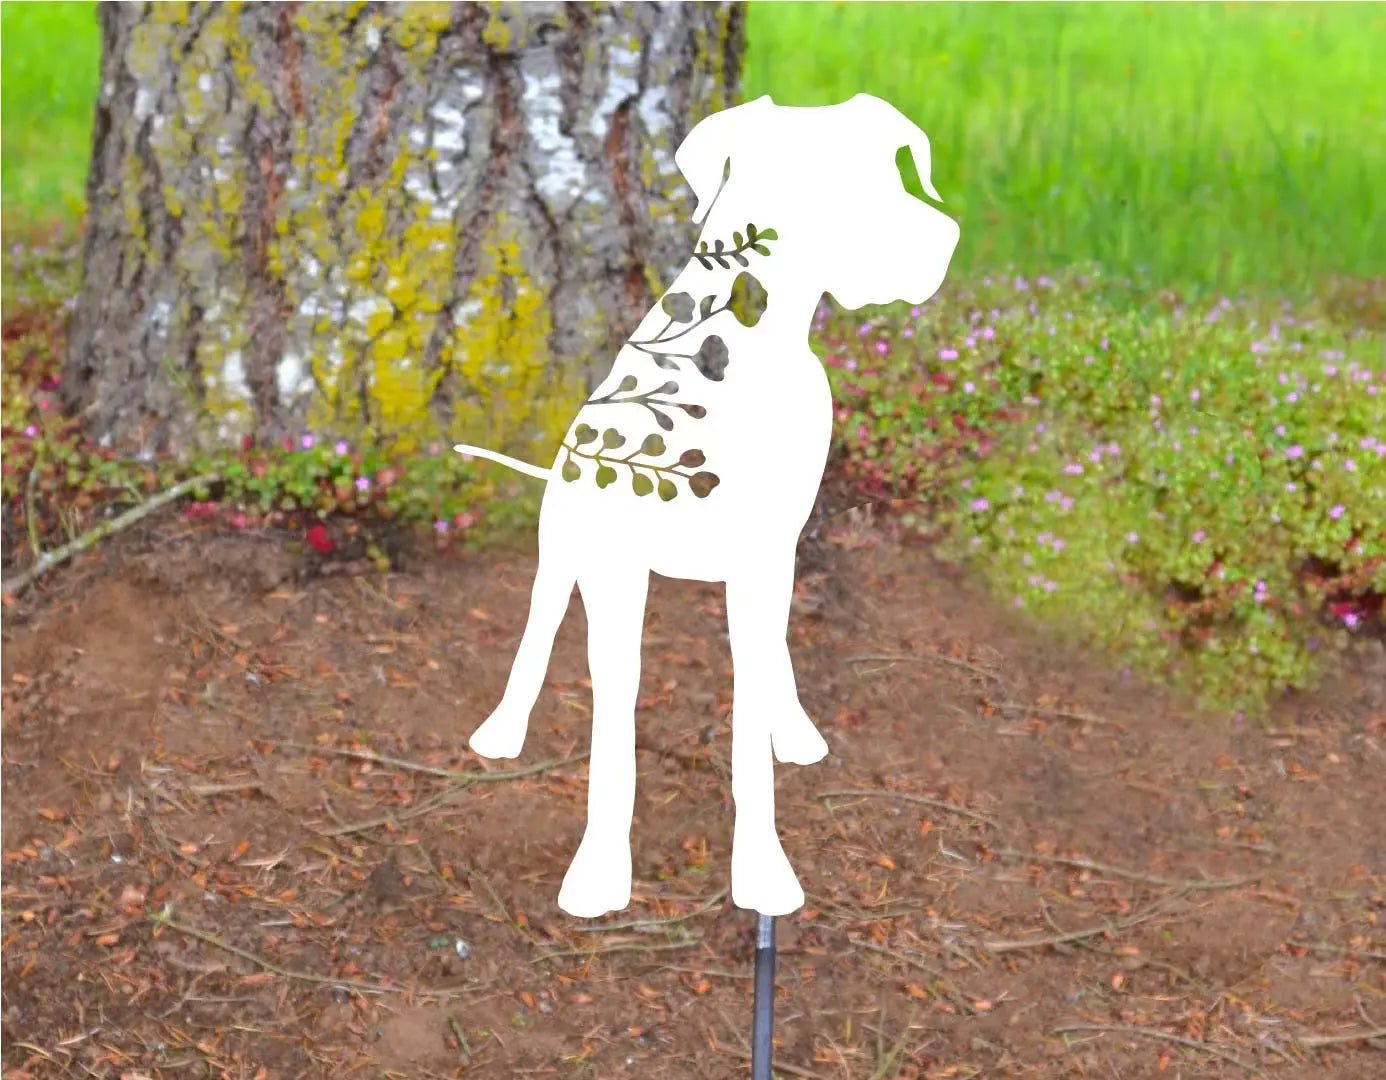 Metal Art Floral Great Dane Name Stake Decoration, Great Dane Mom Dad Garden Yard Art Gift Garden Decoration Outdoor Decor Personalize Love, Stake Attached(12" Stake Detachable)